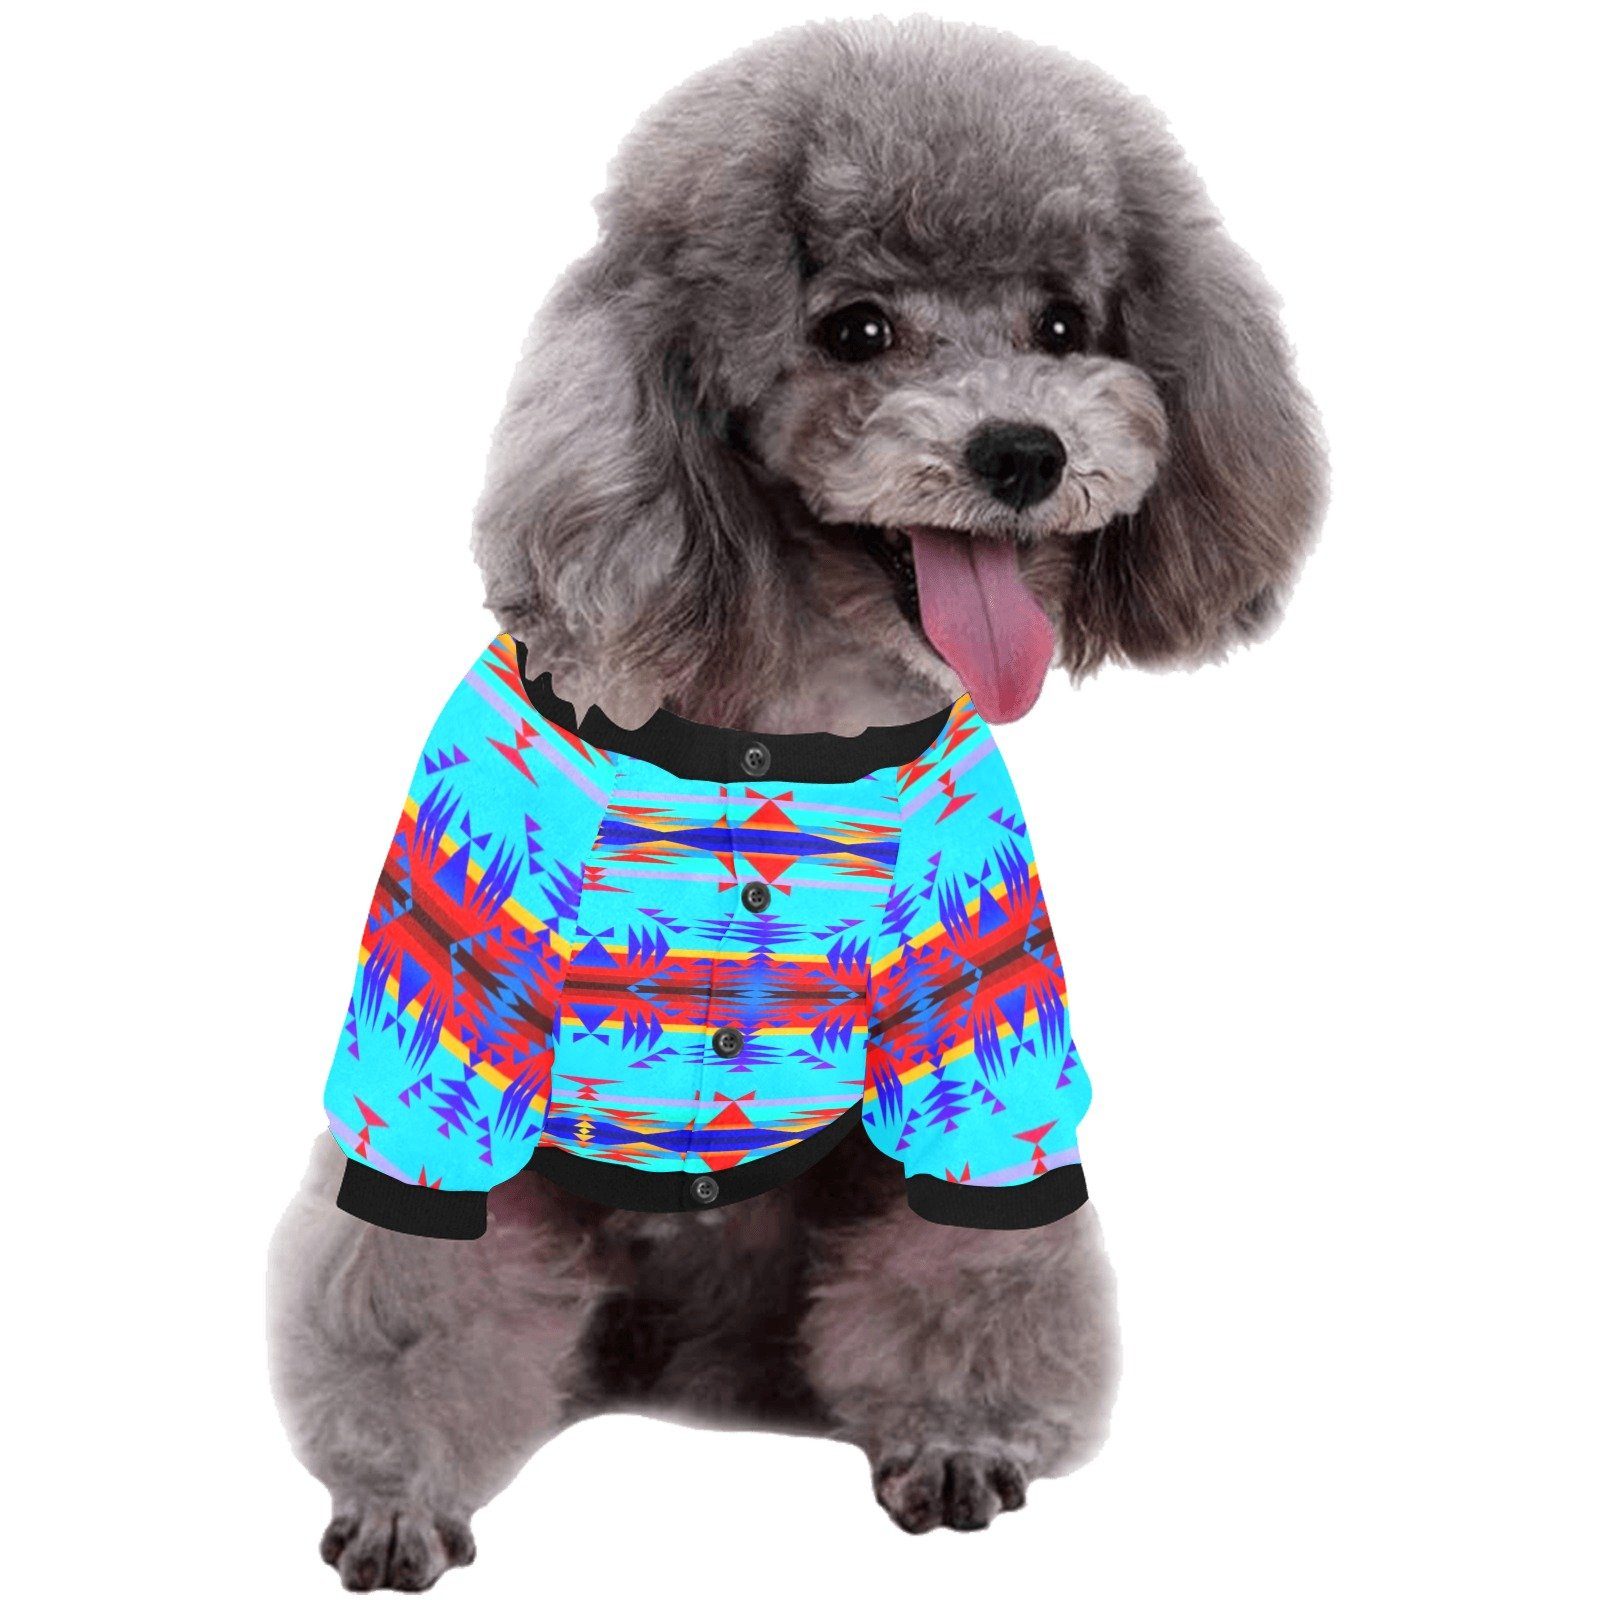 Between the Mountains Blue Pet Dog Round Neck Shirt Pet Dog Round Neck Shirt e-joyer 